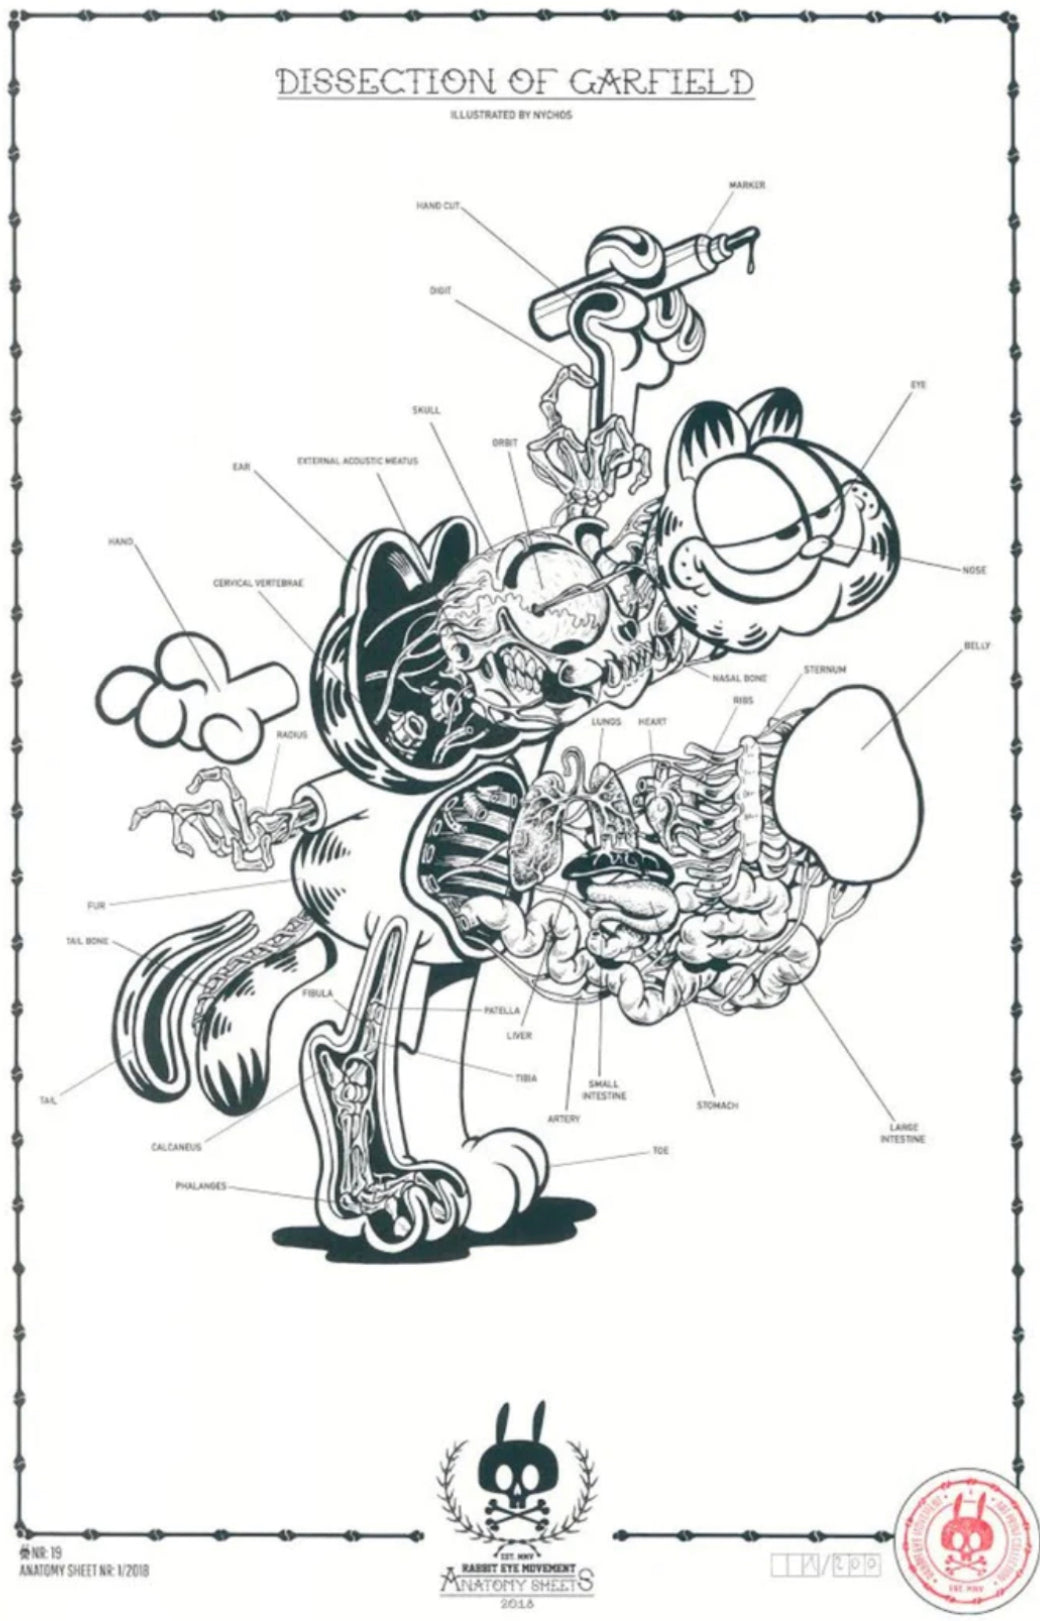 Nychos “Dissection Of Garfield”